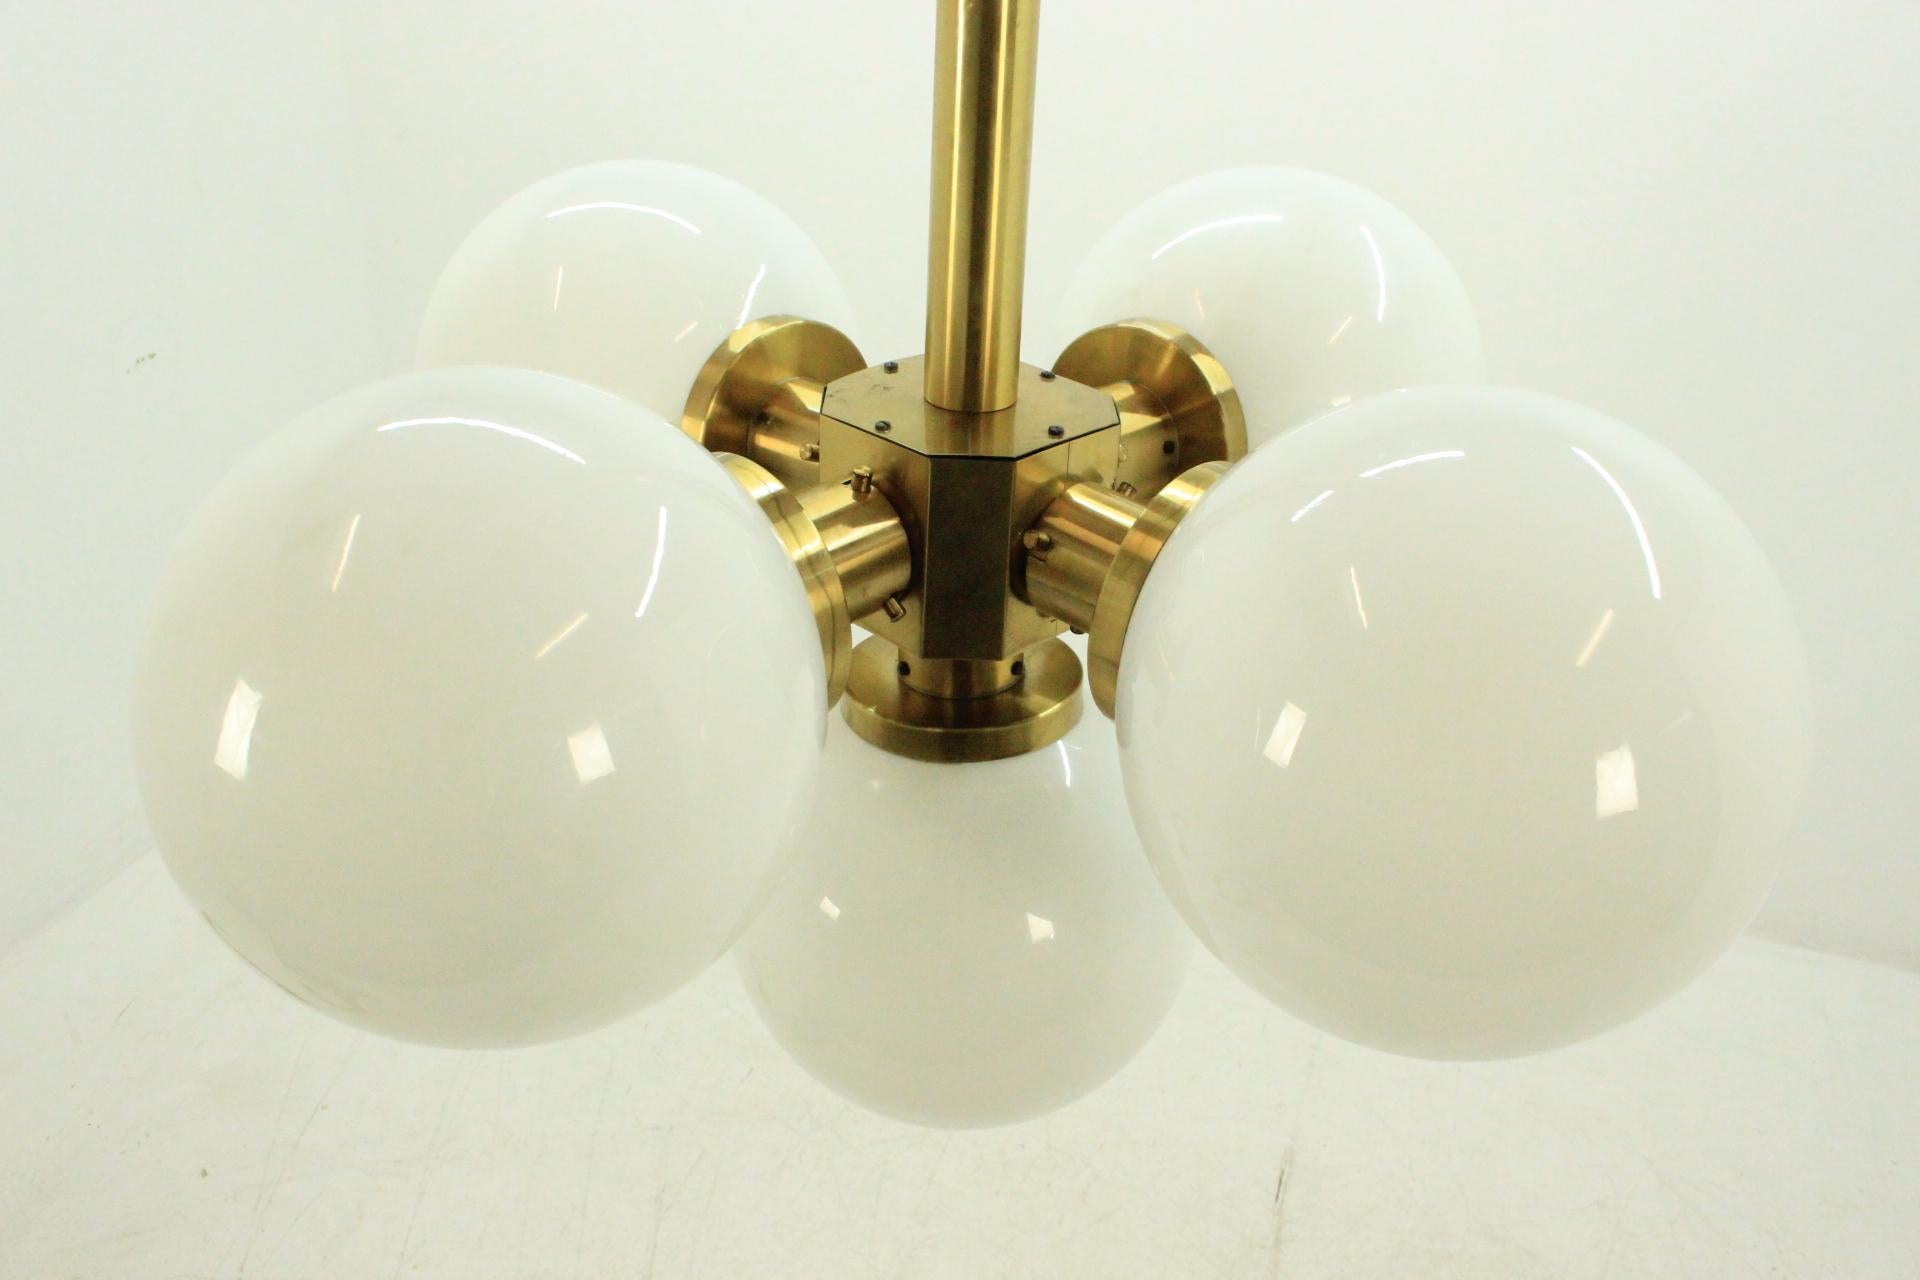 - From hotel in Prague
- 5 balls from opaline glass
- Diameter of ball is 30 cm
- Very representative
- Nice style of lighting
- Very good original condition.